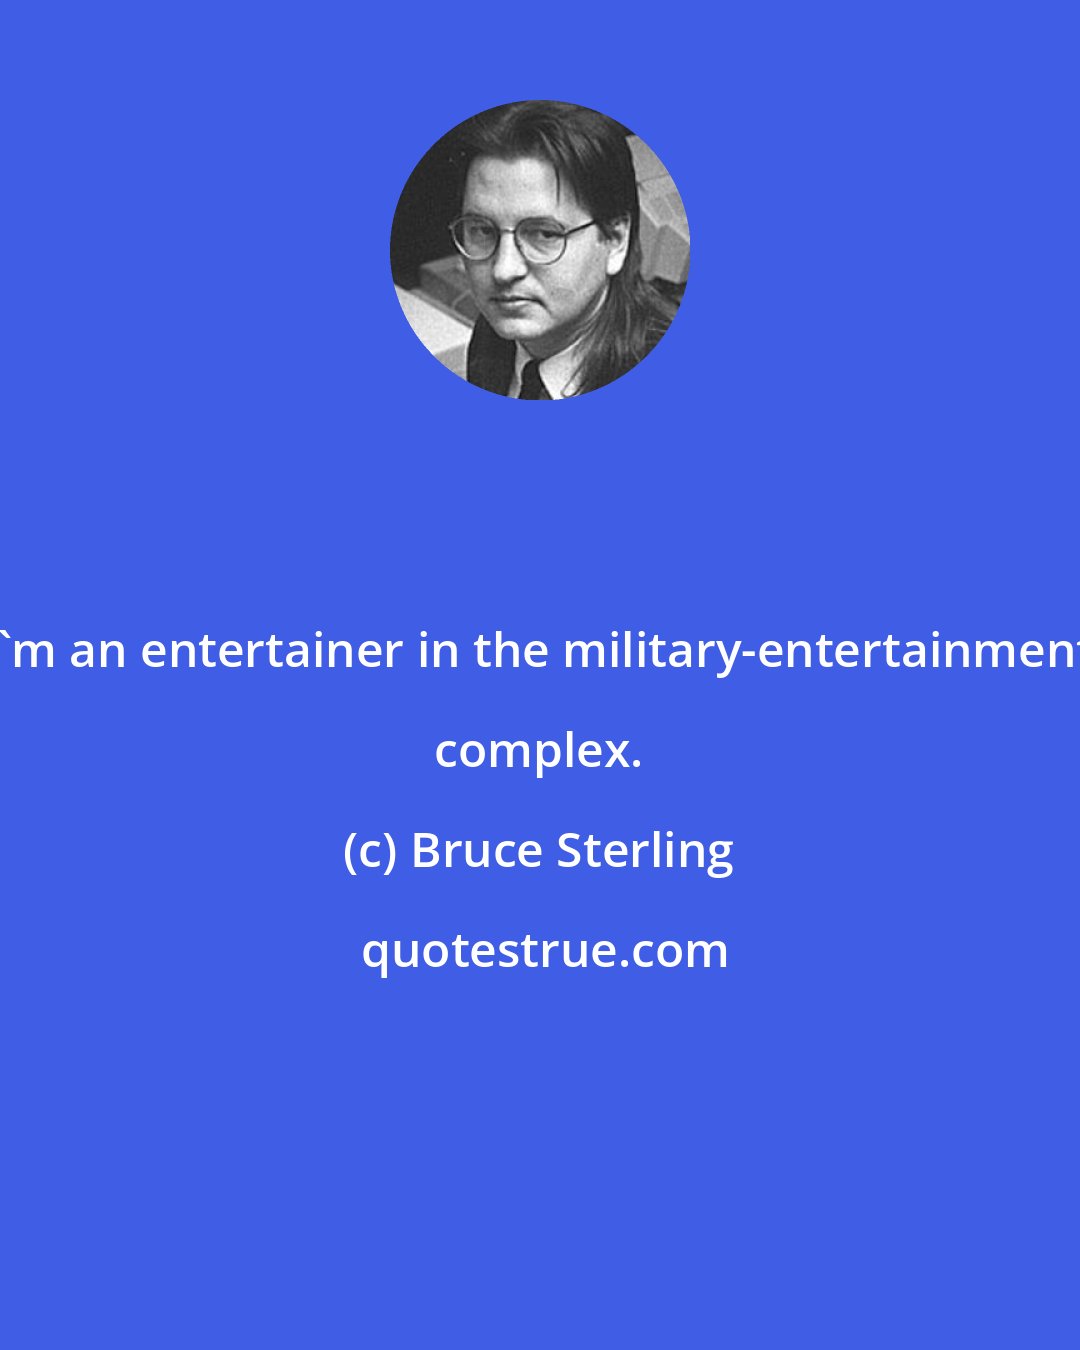 Bruce Sterling: I'm an entertainer in the military-entertainment complex.